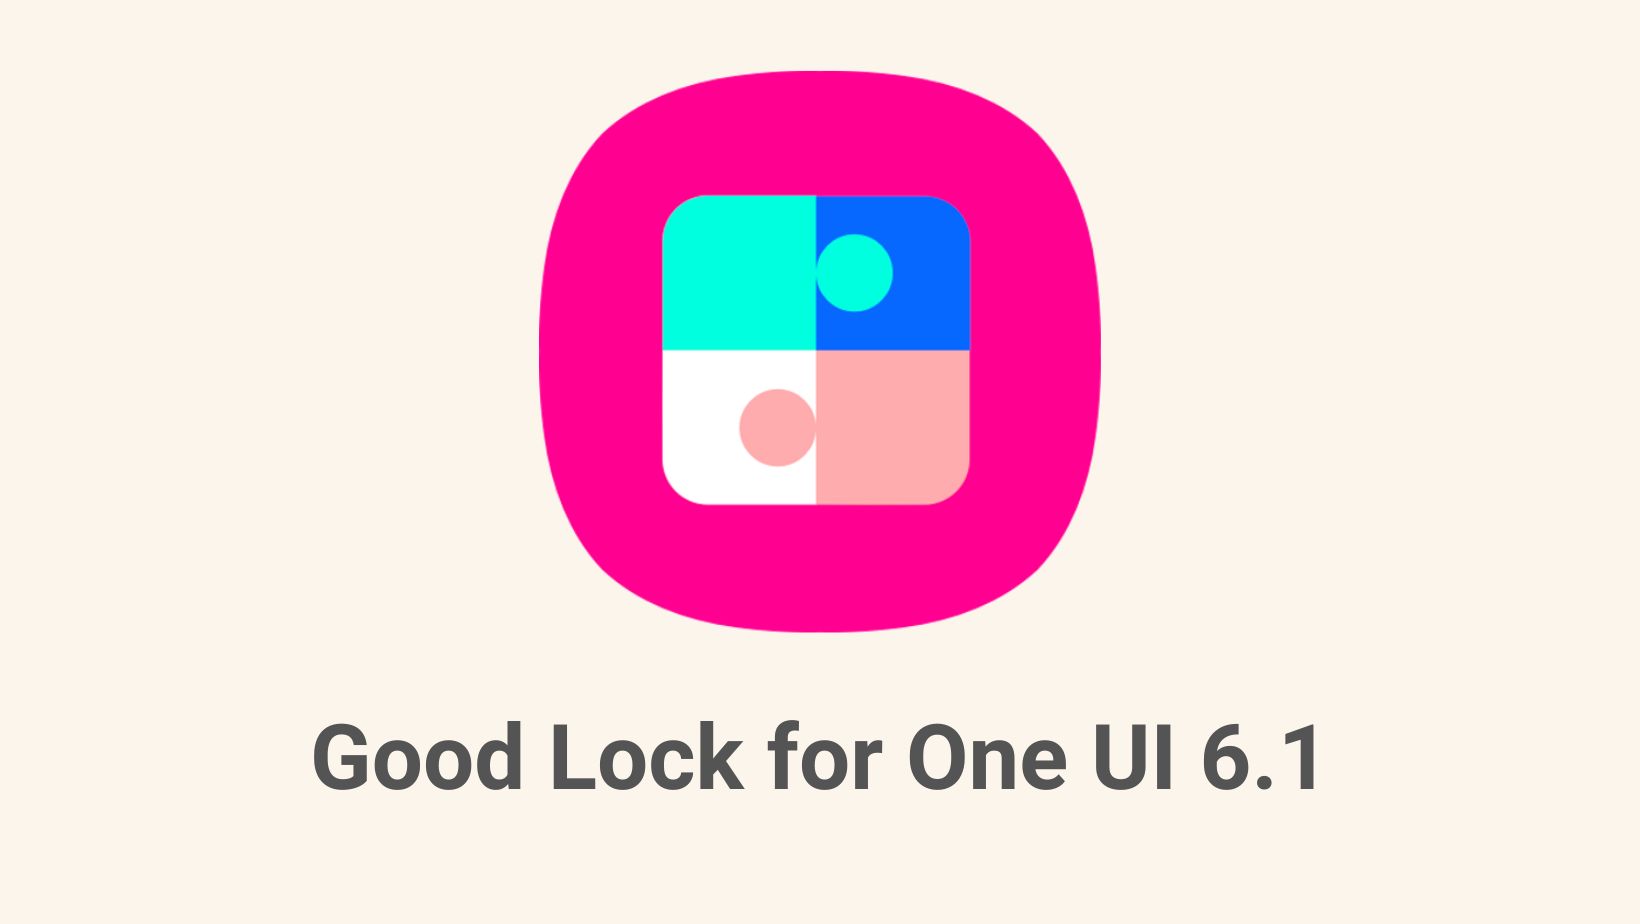 Good Lock for One UI 6.1